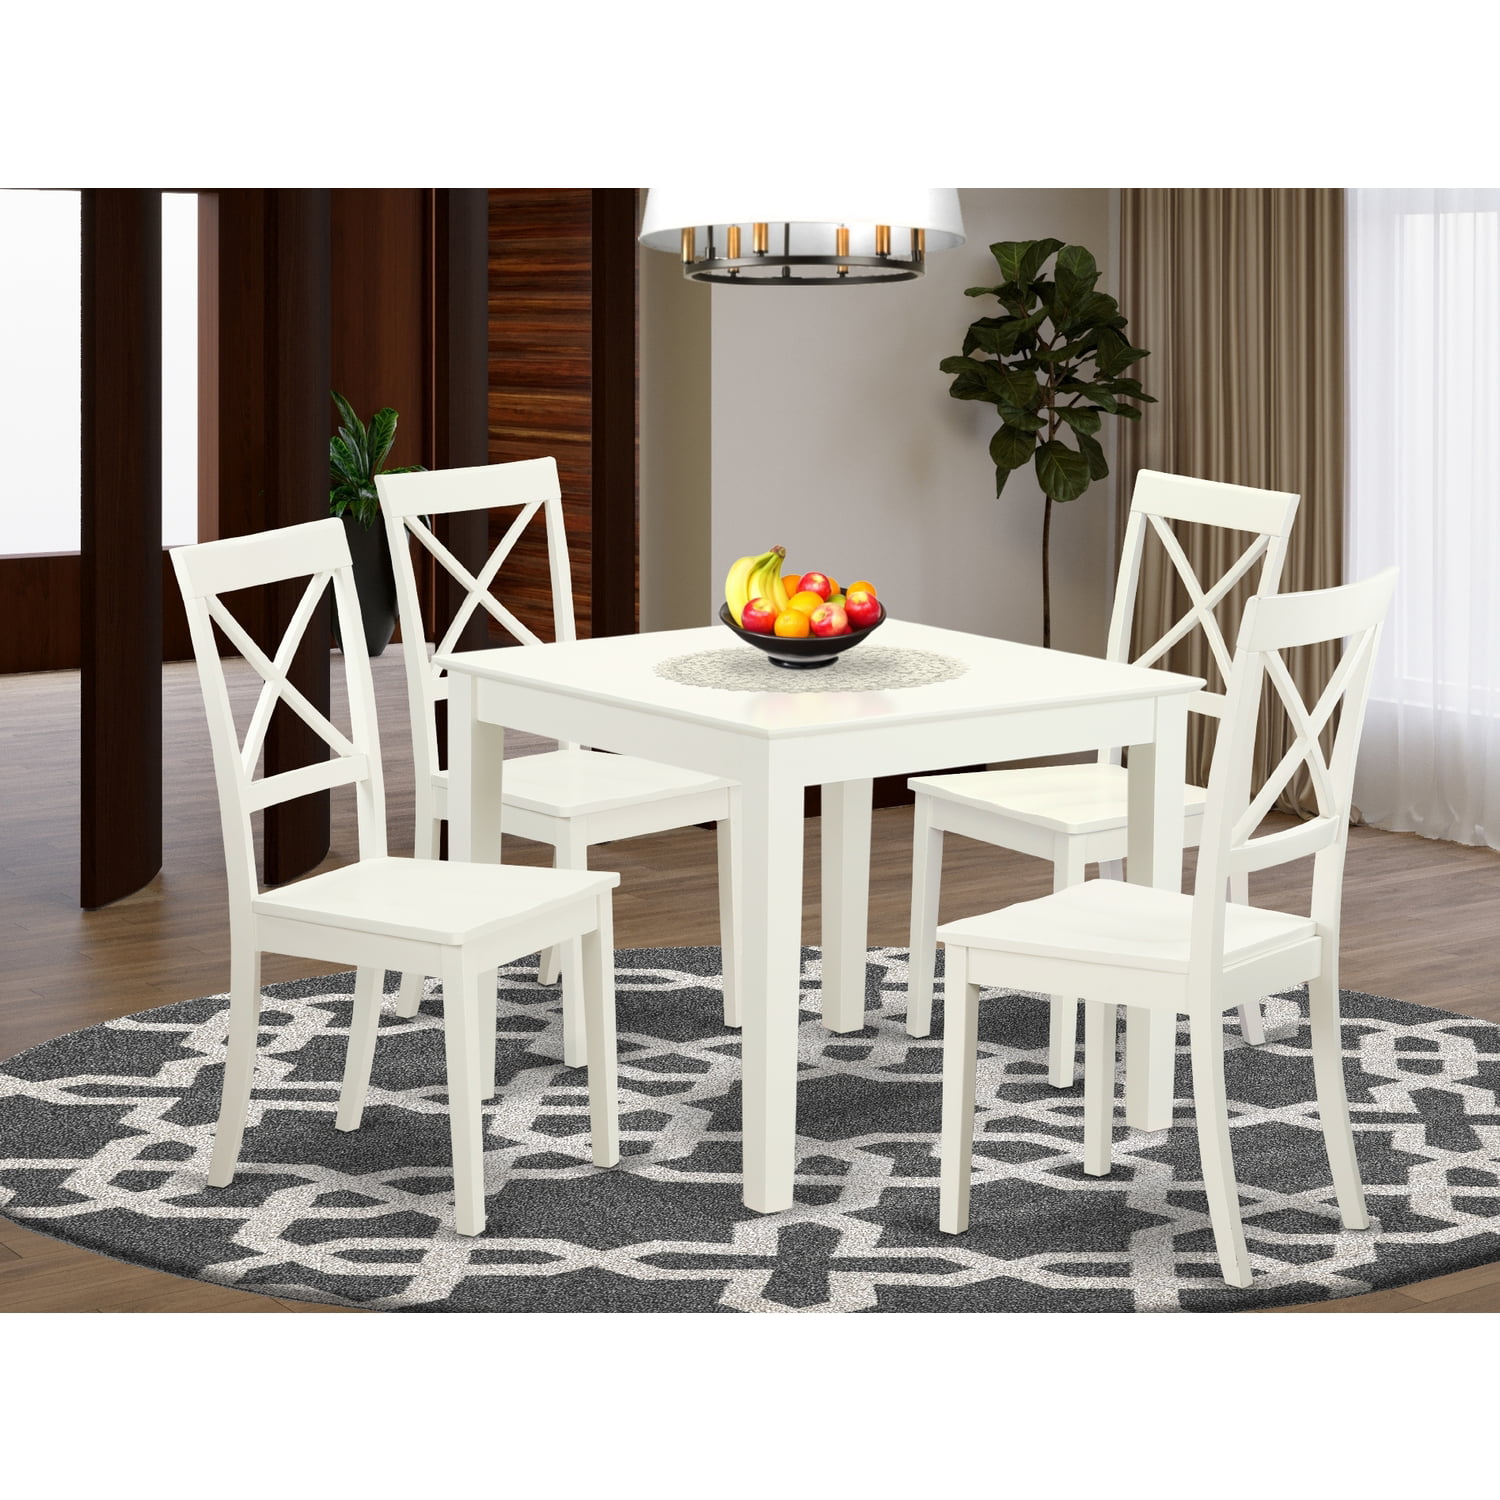  images of kitchen tables